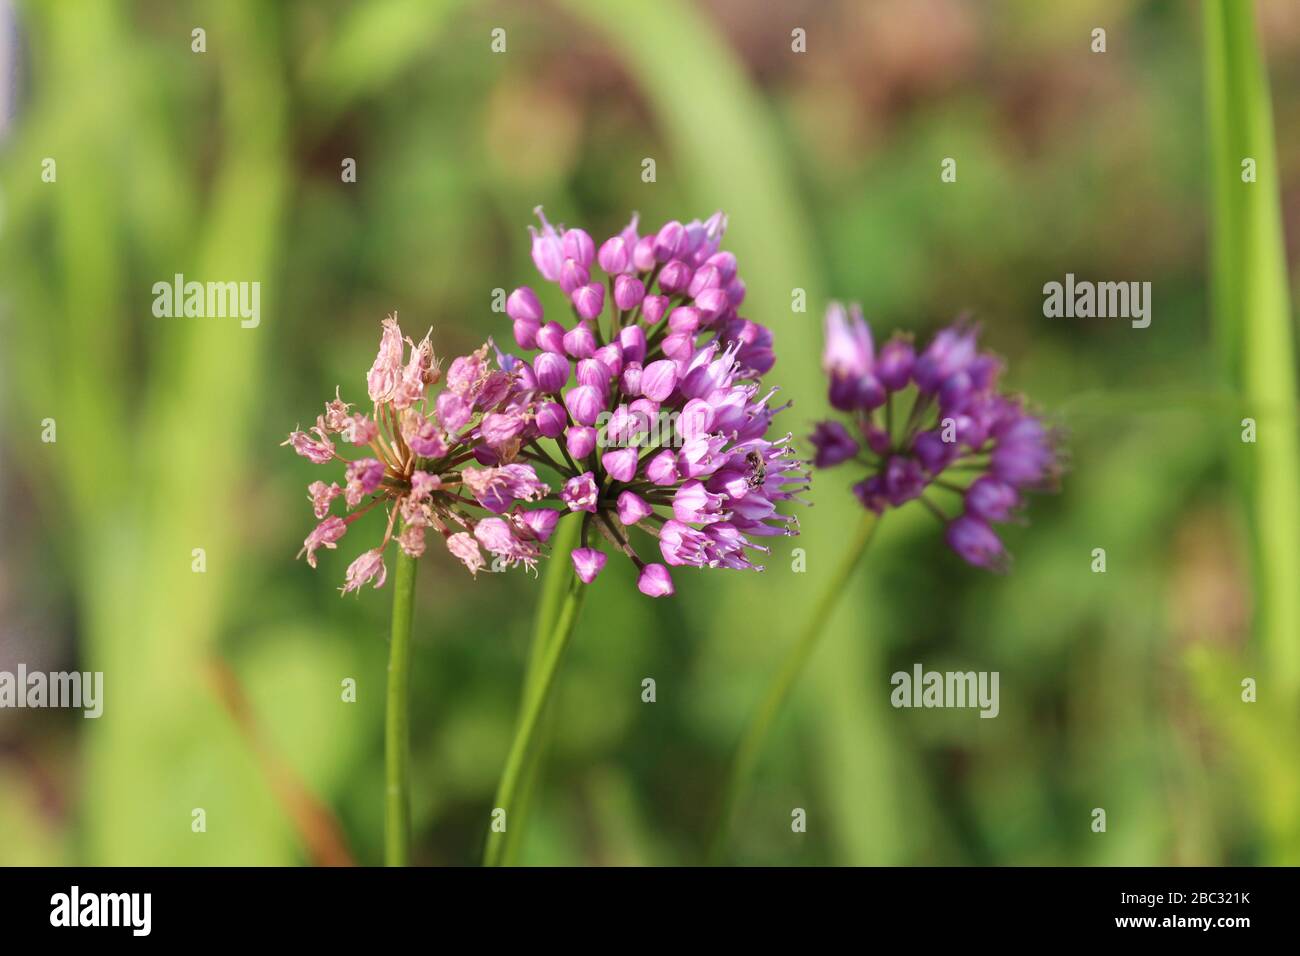 Close up of flower heads of Allium Millenium with buds, blooms and spent flowers Stock Photo